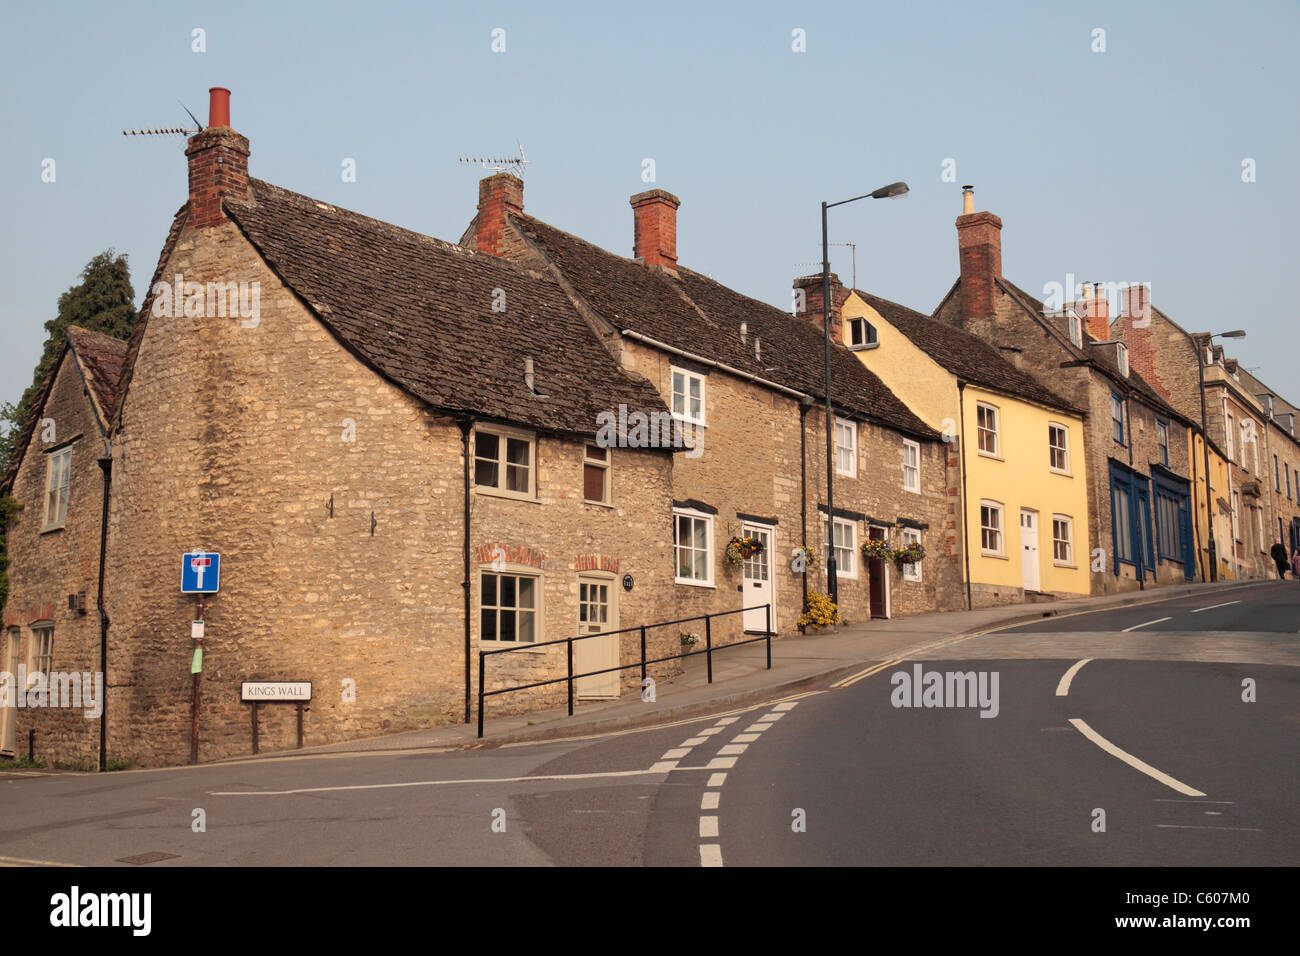 Terraced properties on the hill leading up to the High Street in Malmesbury, Wiltshire, England. Stock Photo